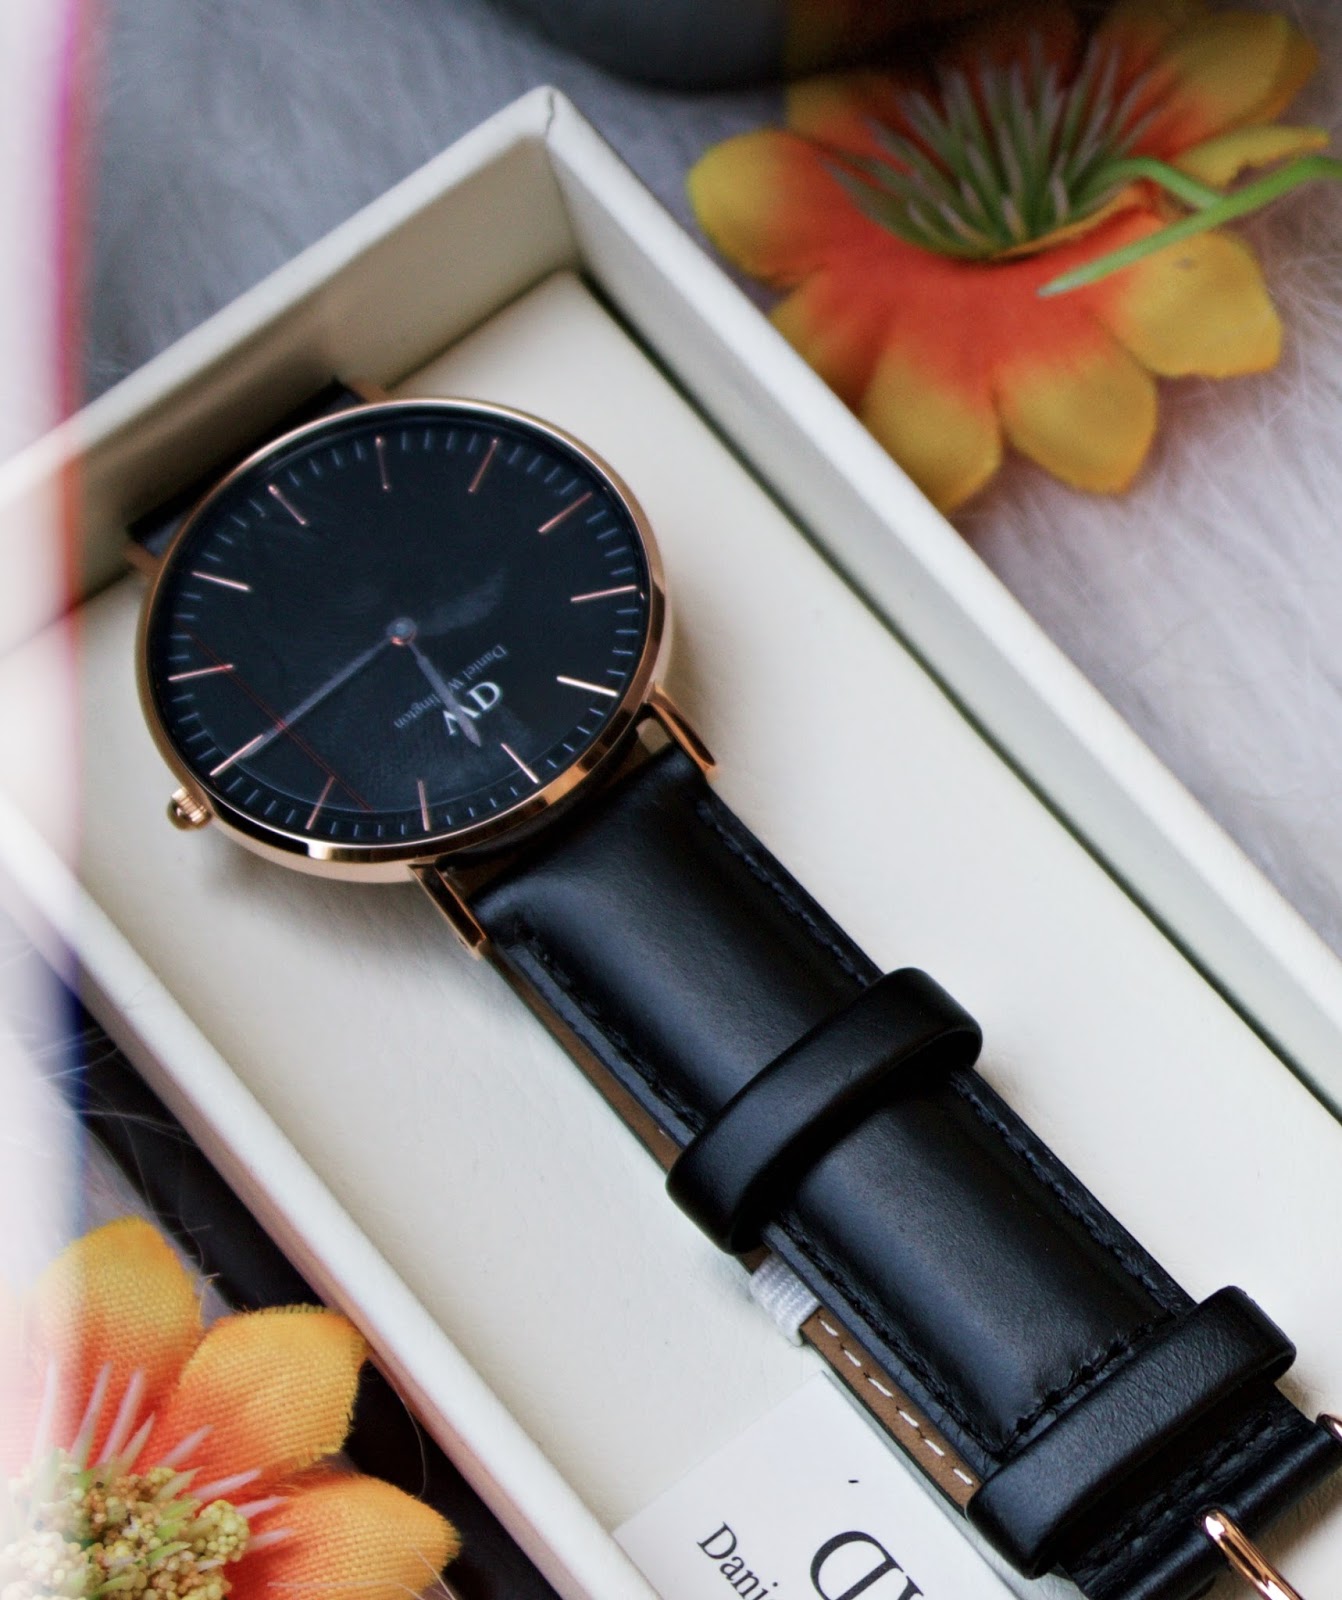 CIRCLED LEATHER WRISTWATCH (WHY DANIELWELLINGTON IS RAKING THE NUMBERS)